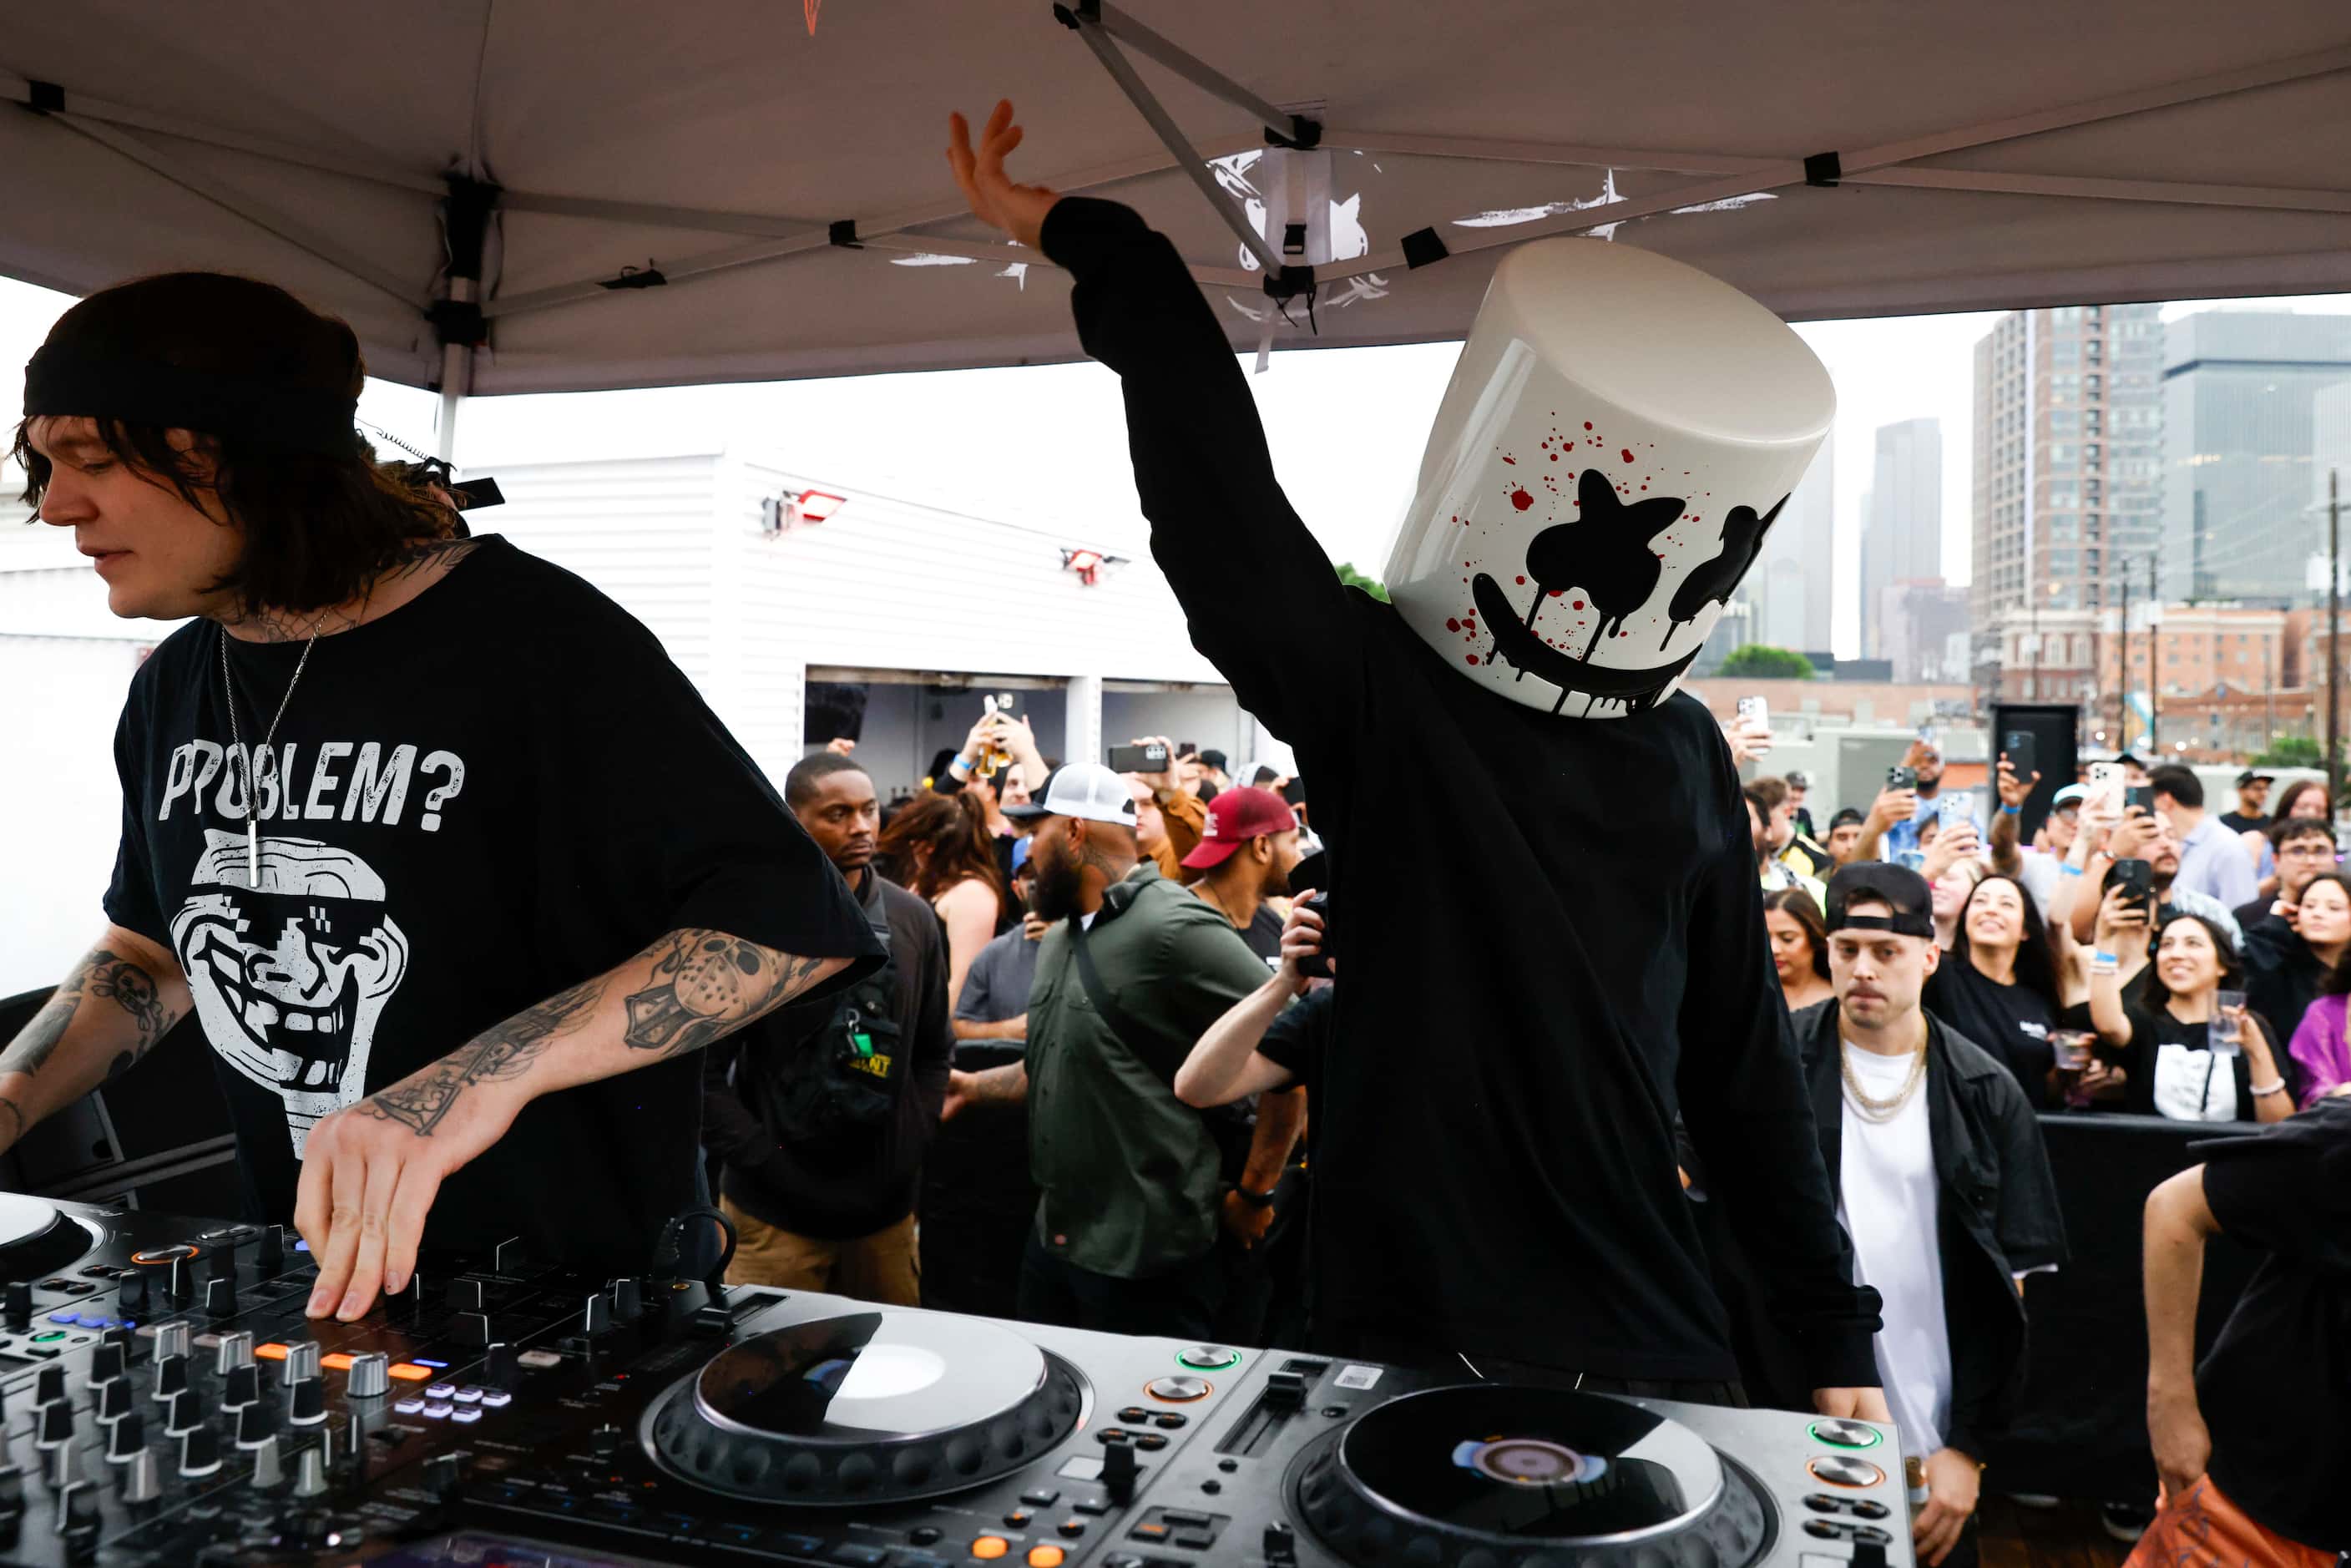 DJ Svdden Death (left) and Marshmello, perform during a surprise pop up show on Friday,...